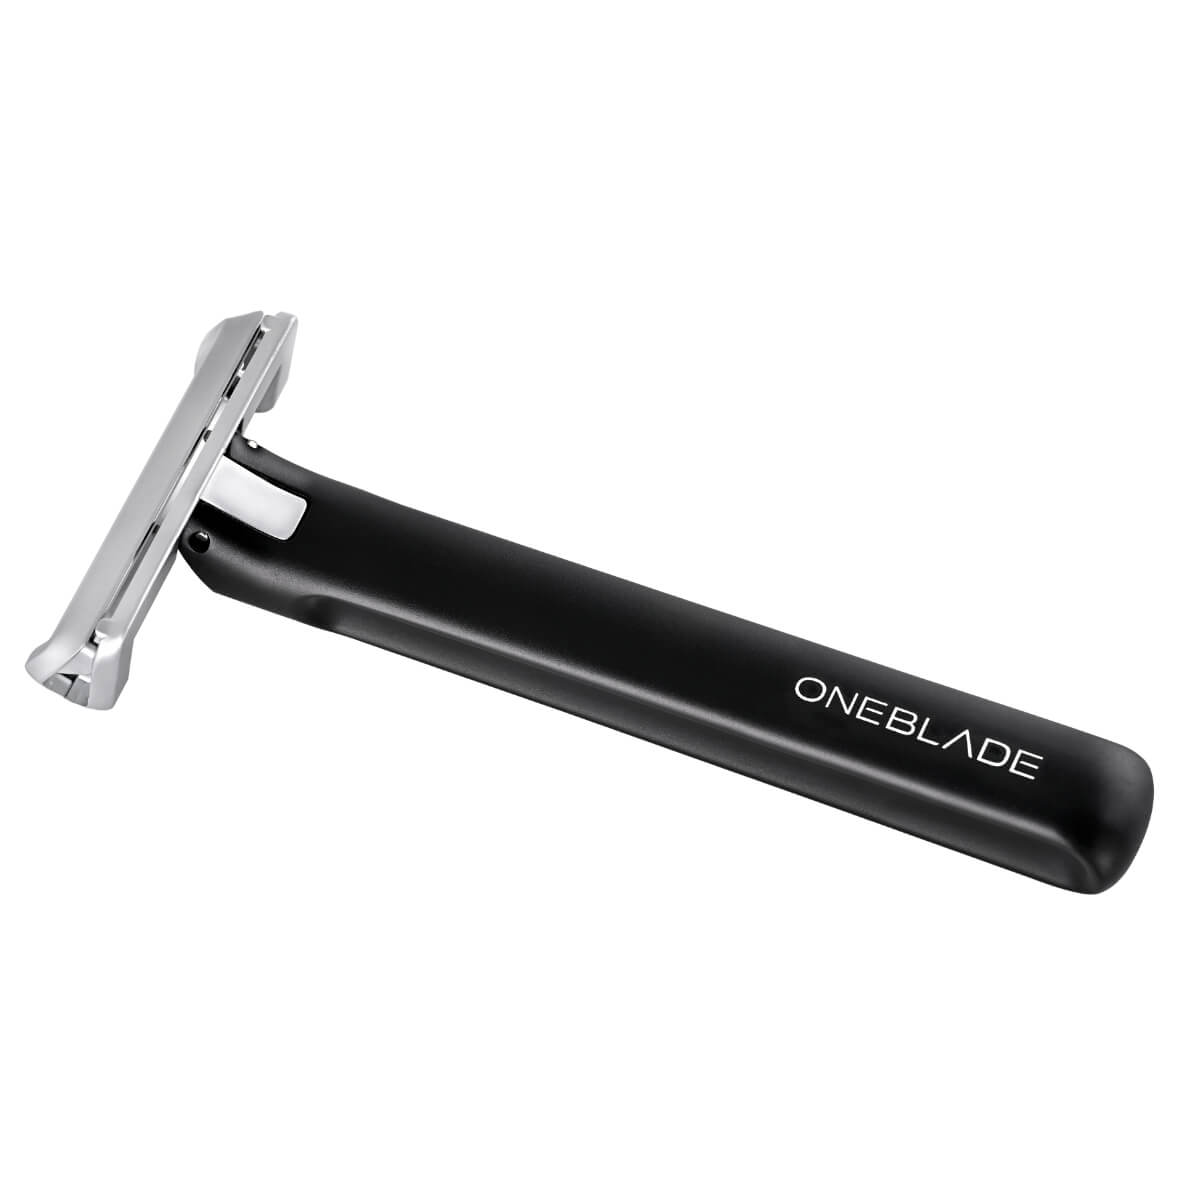 All-Metal Element Single Blade Safety Razor Handle laying down